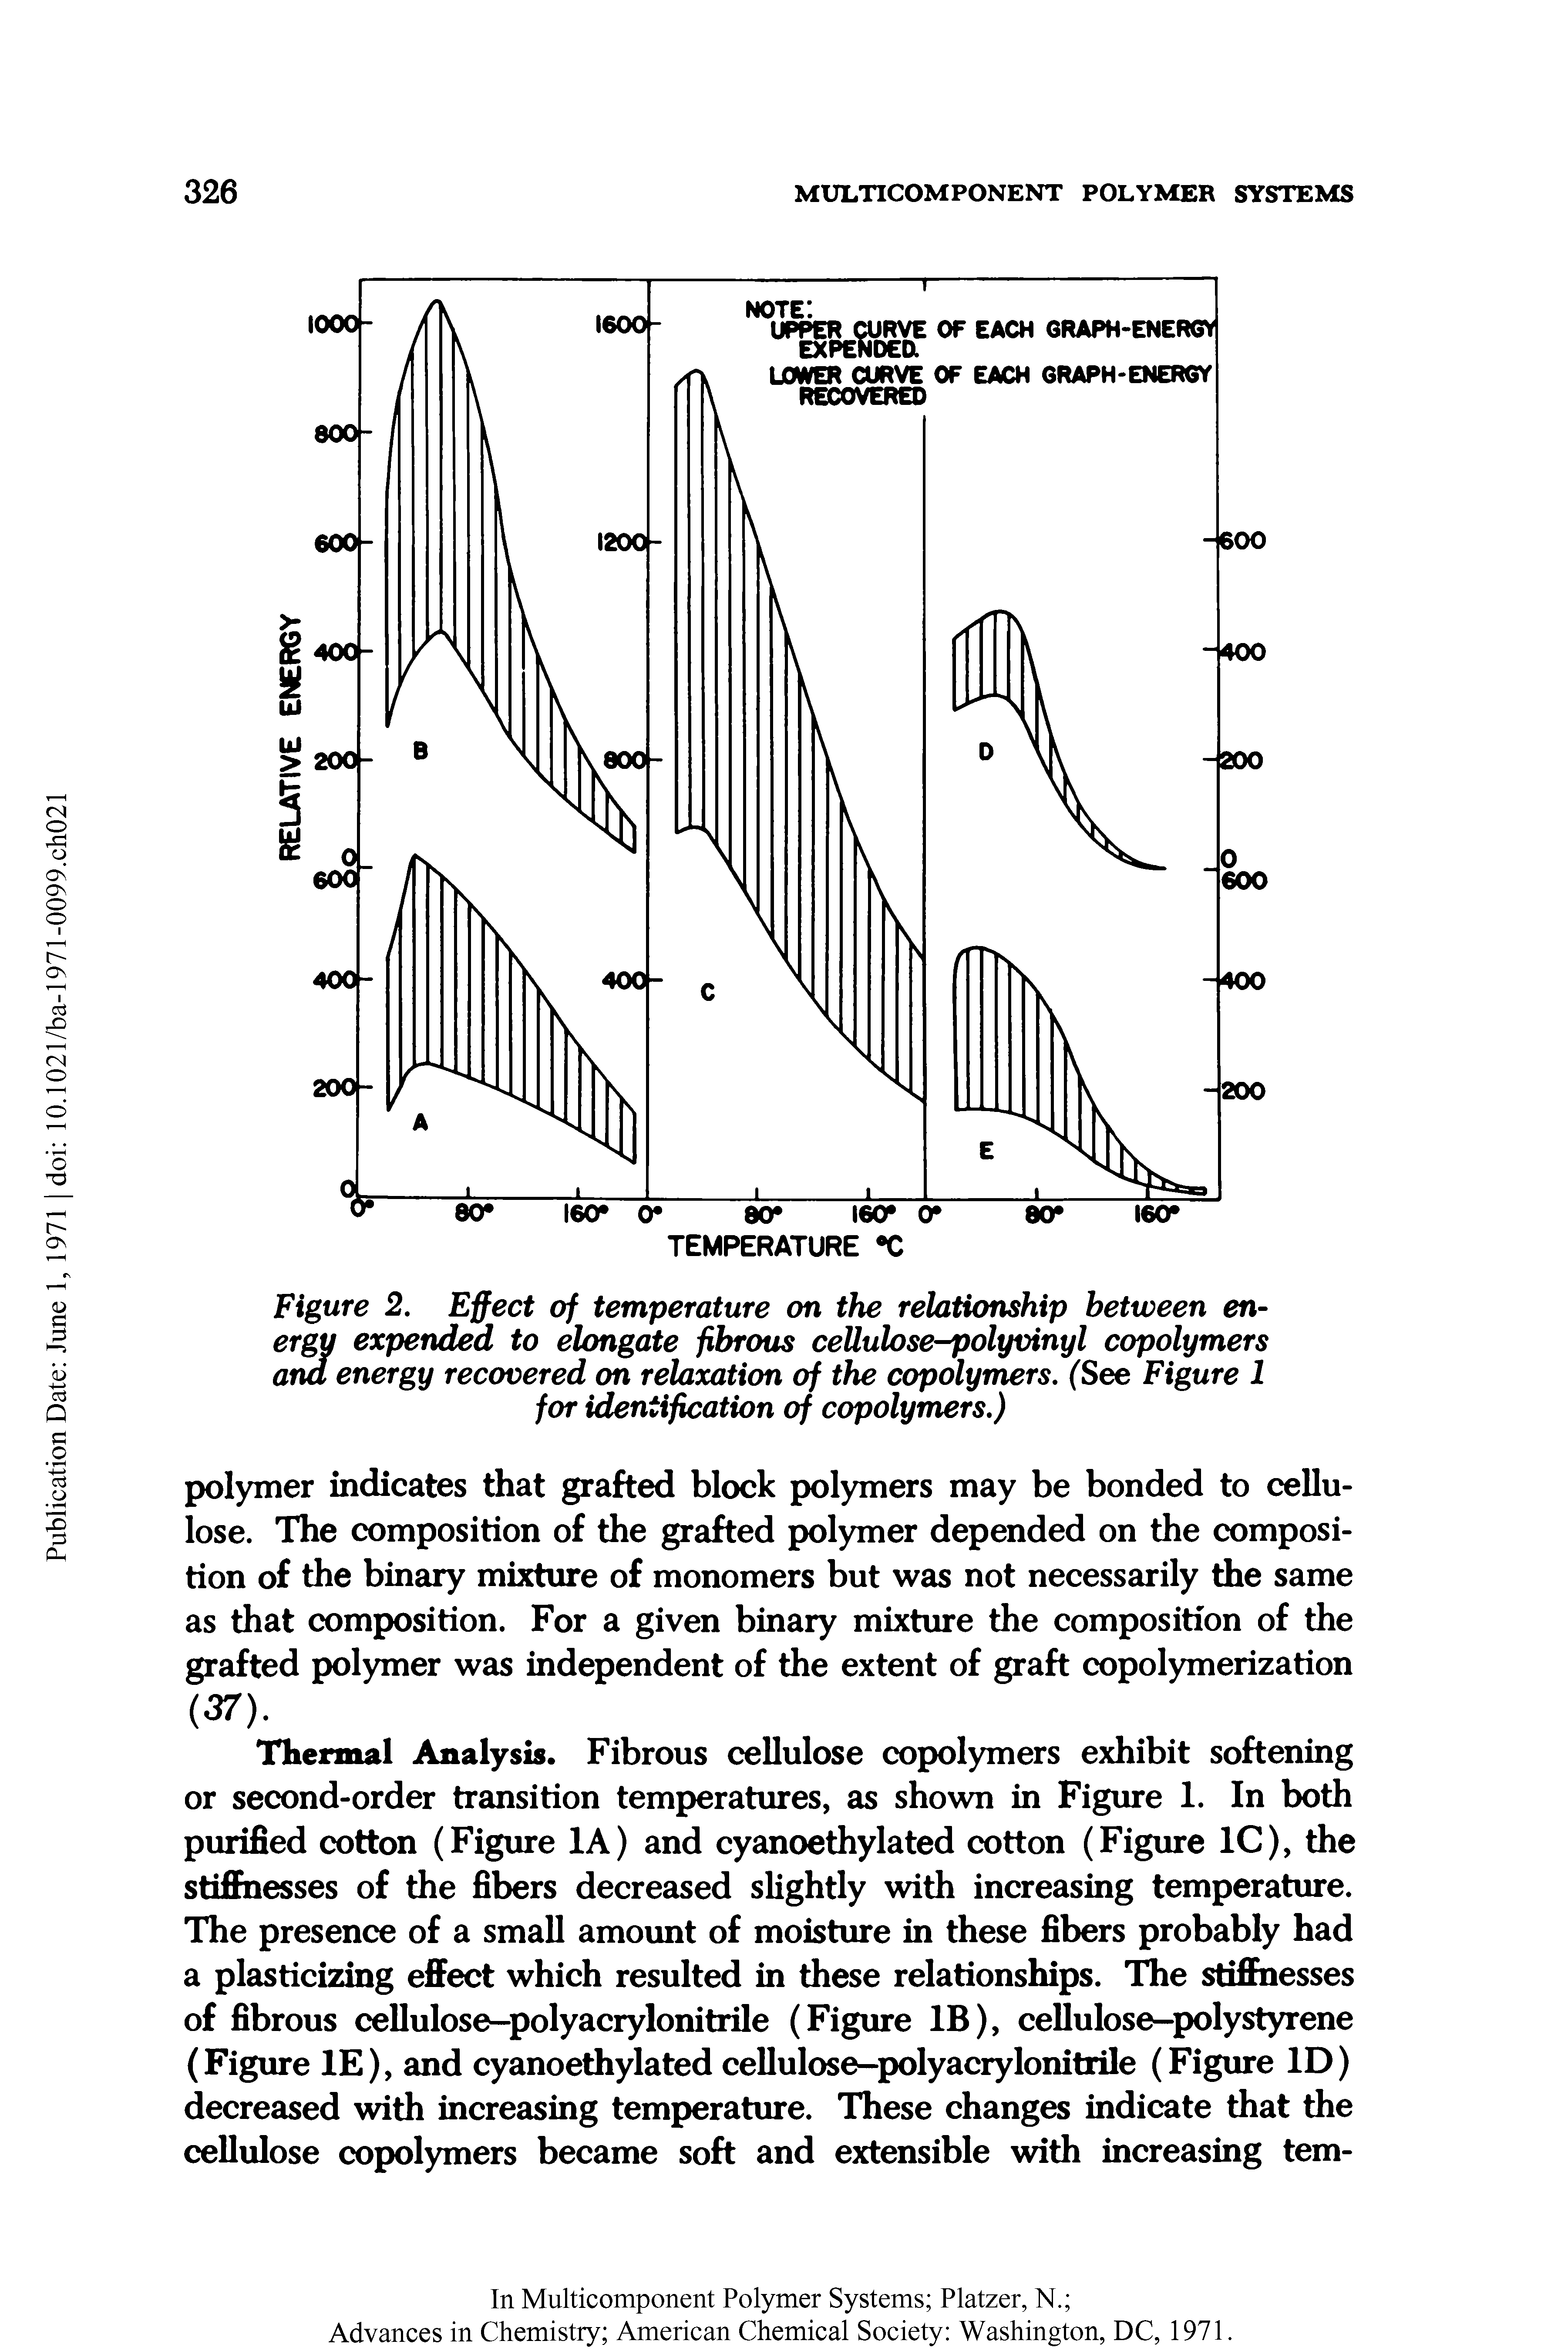 Figure 2. Effect of temperature on the relationship between energy expended to elongate fibrous cellulose-polyvinyl copolymers ana energy recovered on relaxation of the copolymers. (See Figure 1 for identification of copolymers.)...